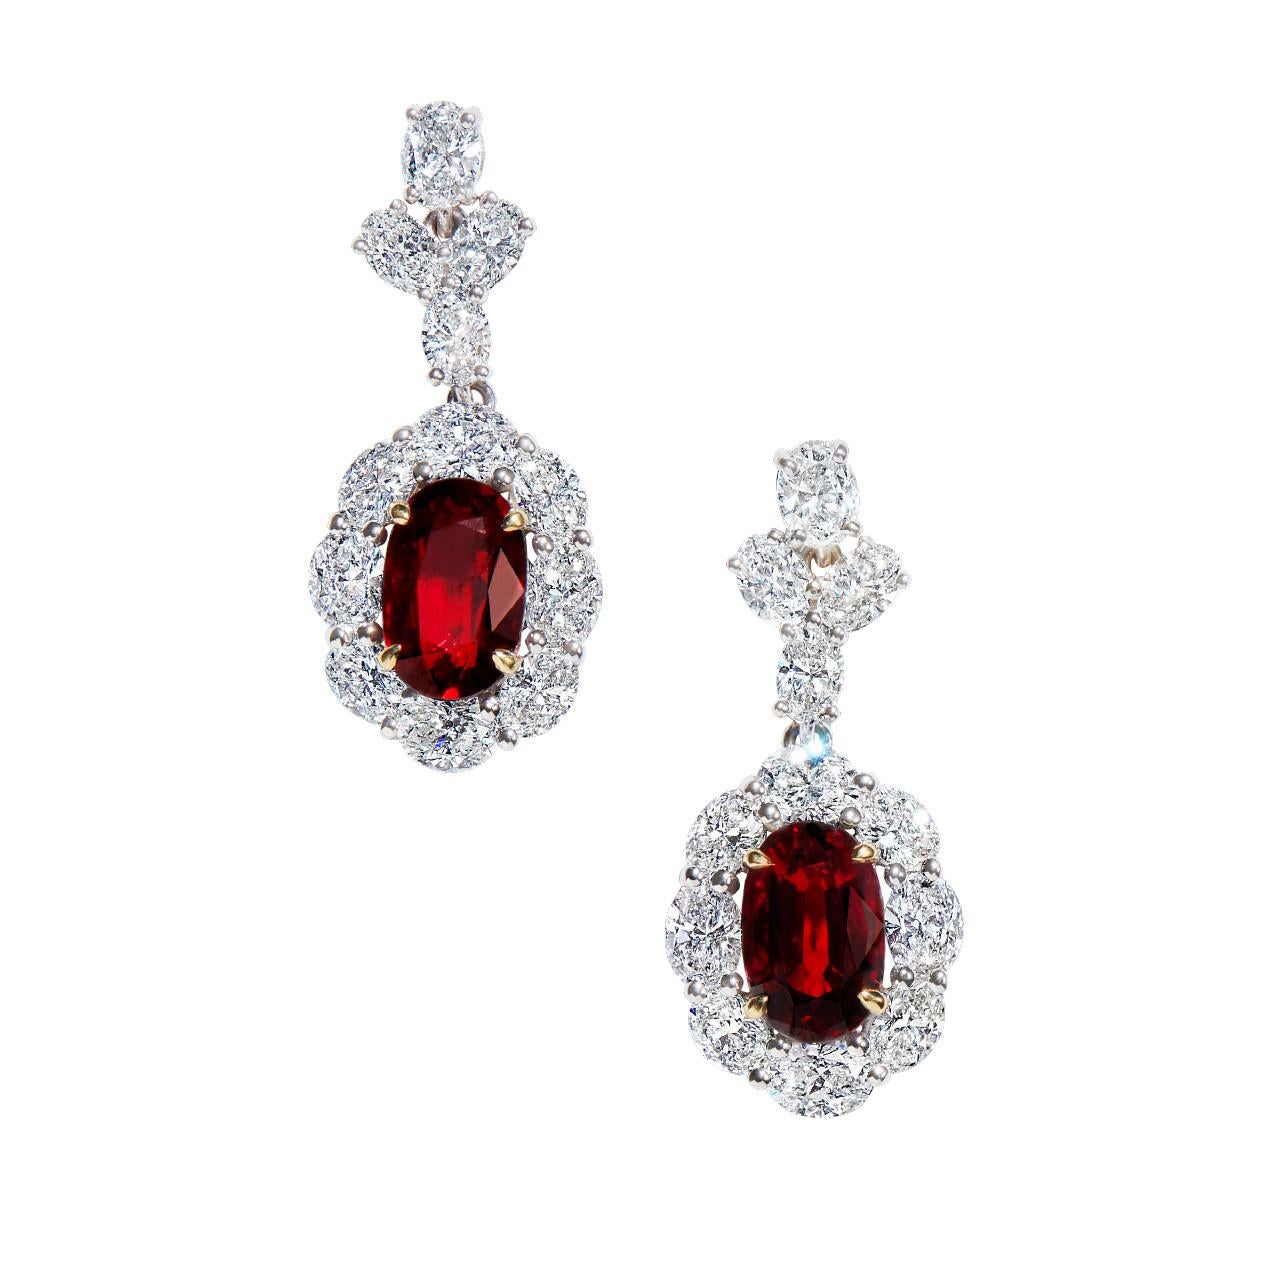 •	18KT Two-Tone
•	15.48 Carats
•	Sold as a pair (2 earrings in total)

•	Number of Oval Rubies: 2
•	Carat Weight:
o	4.02ct
o	Color: Vivid to Deep Red
o	GRS2019-091693

o	4.04ct
o	Color: Vivid Red
o	GRS2019-091694

•	Number of Oval Diamonds: